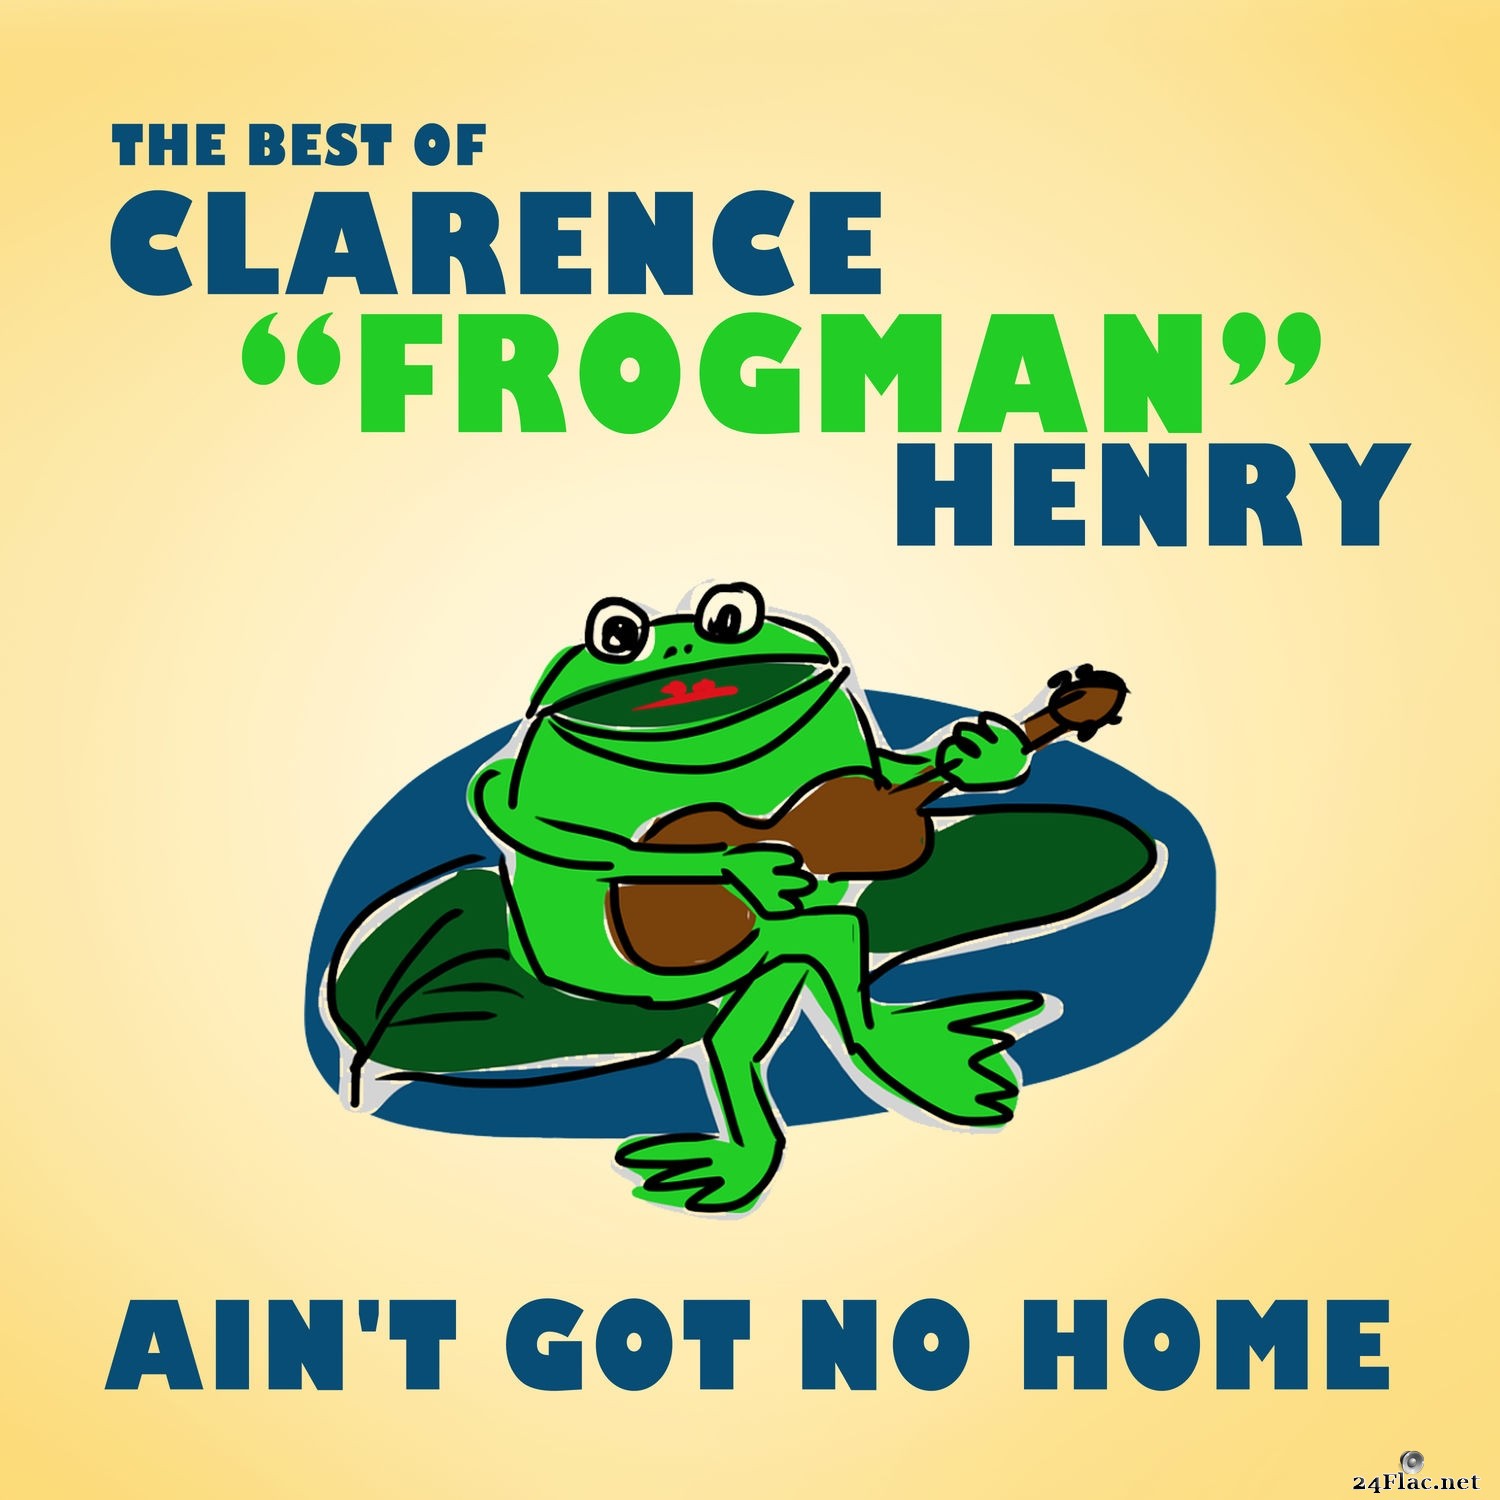 Clarence “Frogman” Henry - Ain't Got No Home: The Best of Clarence "Frogman" Henry (Reissue) (2018) Hi-Res